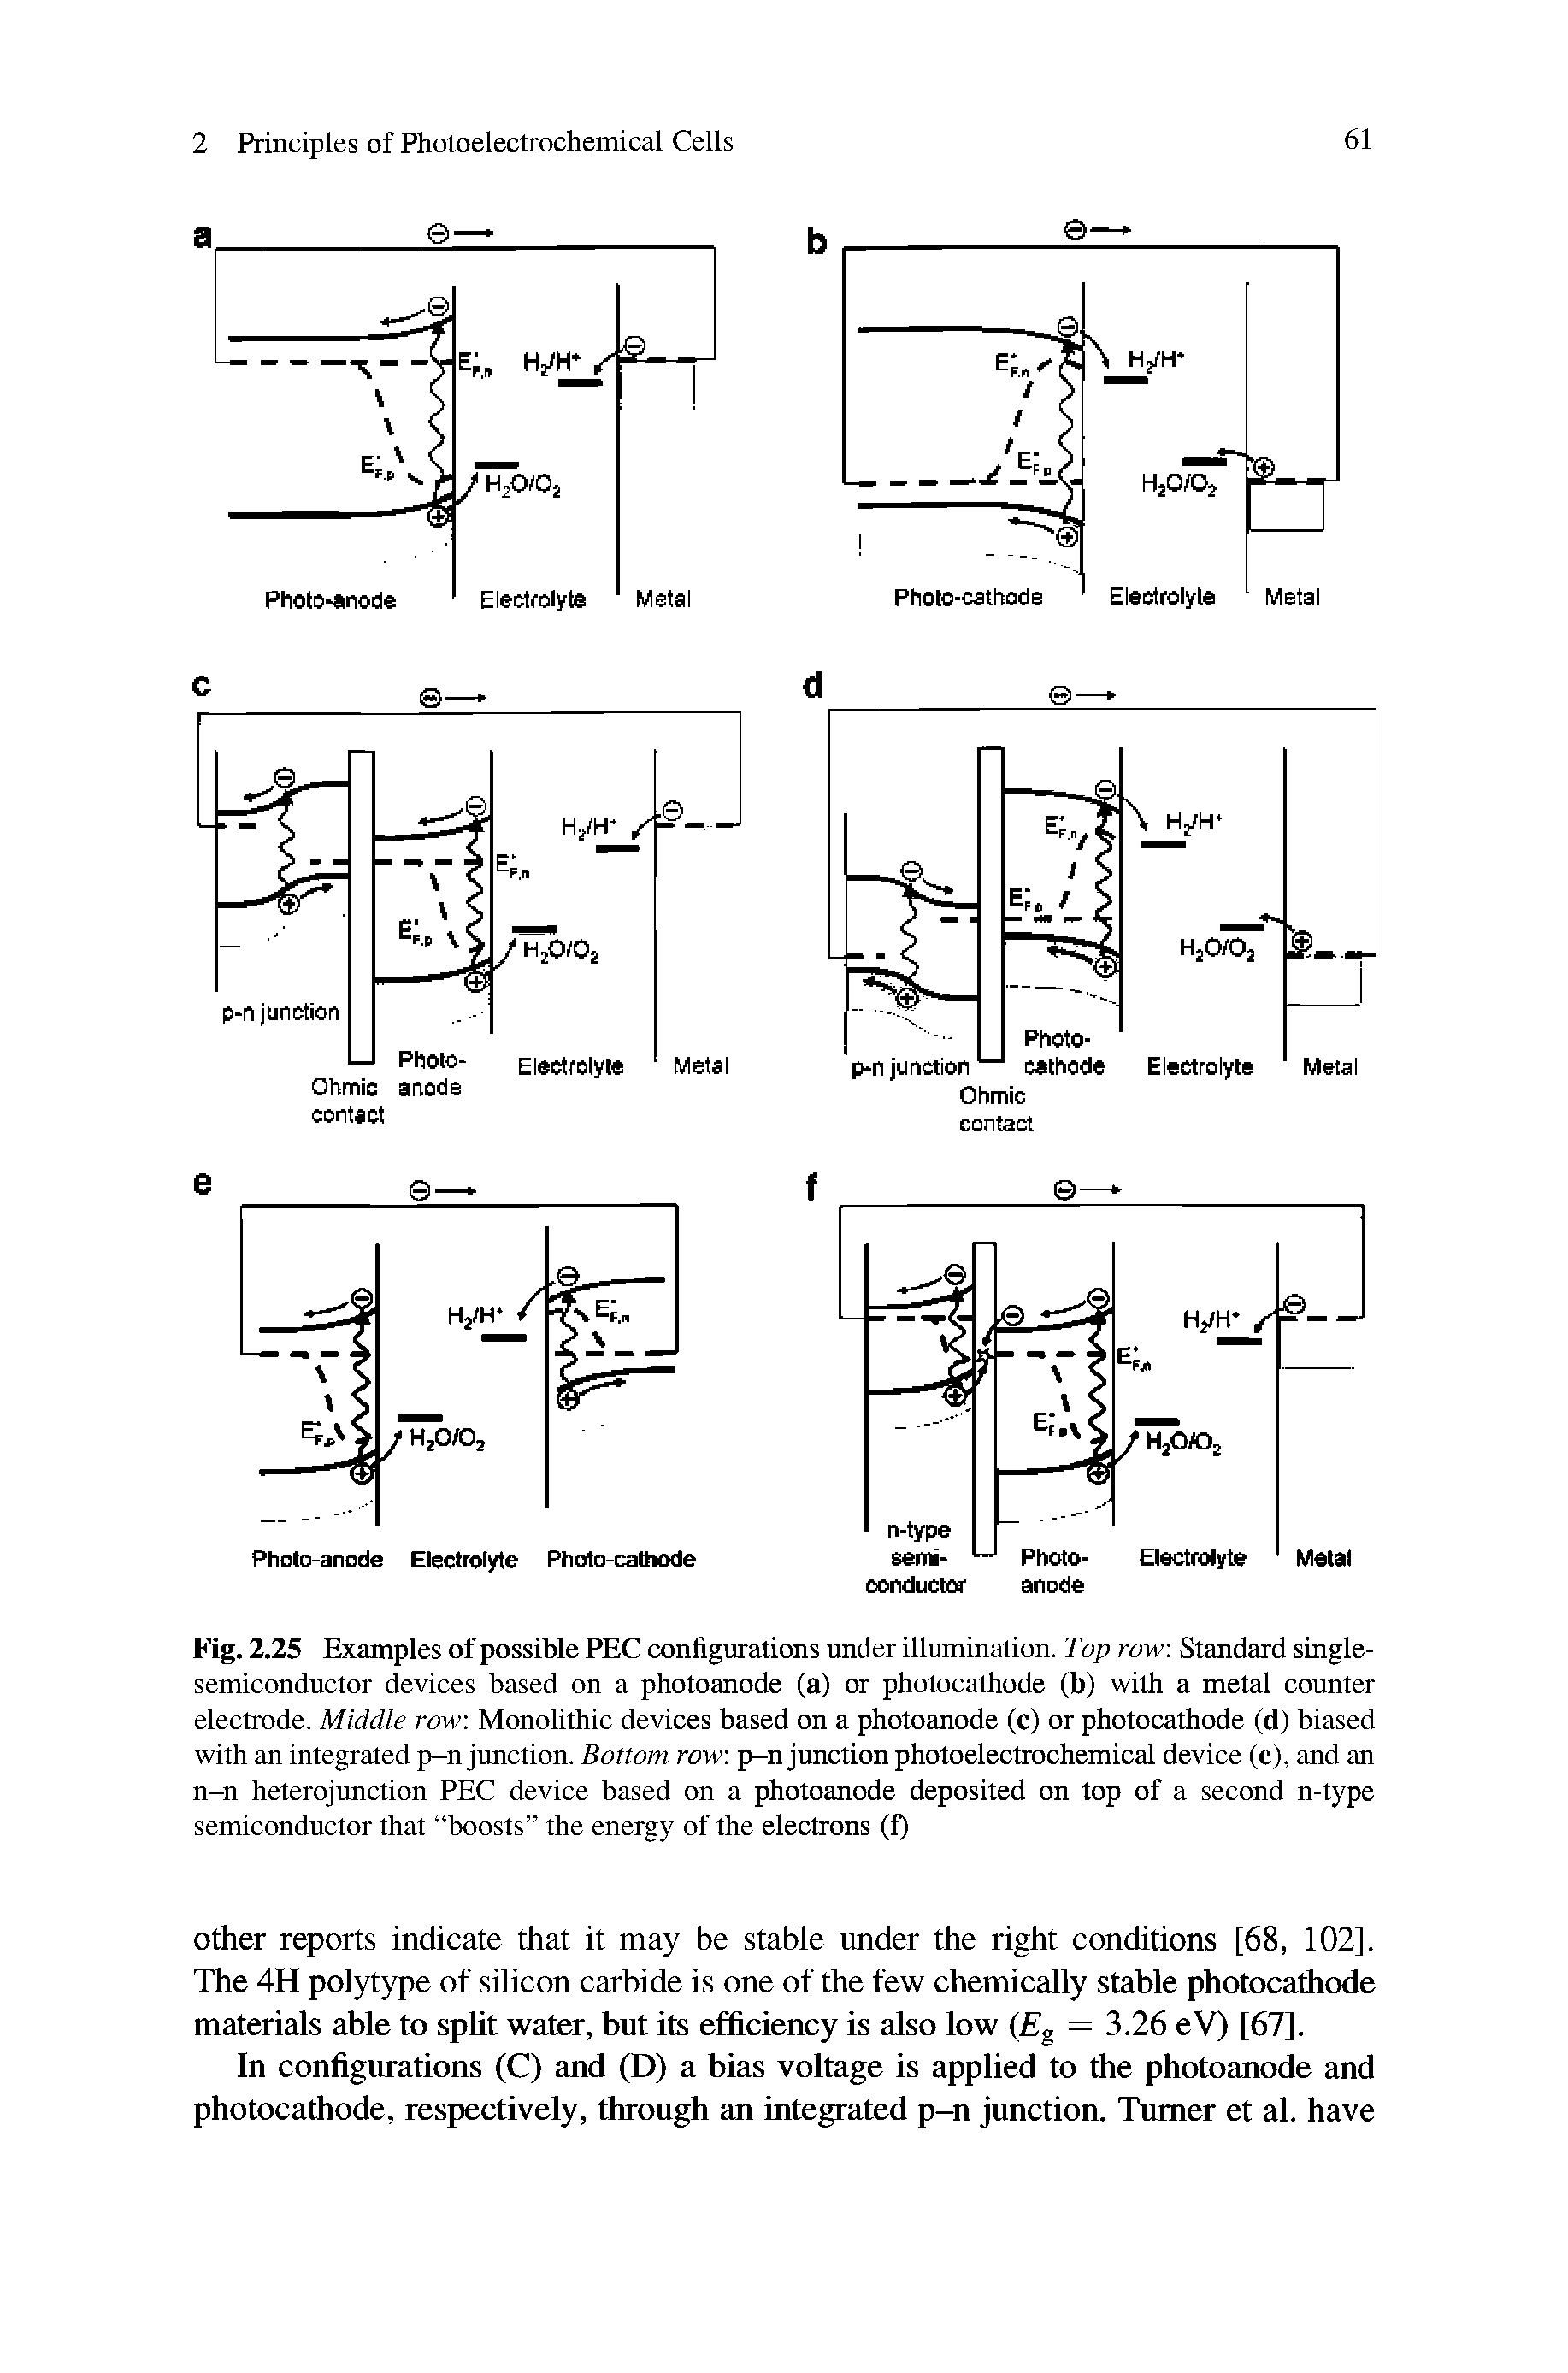 Fig. 2.25 Examples of possible PEC configurations under illumination. Top row Standard singlesemiconductor devices based on a photoanode (a) or photocathode (b) with a metal counter electrode. Middle row Monolithic devices based on a photoanode (c) or photocathode (d) biased with an integrated p-n junction. Bottom row p-n junction photoelectrochemical device (e), and an n-n heterojunction PEC device based on a photoanode deposited on top of a second n-type semiconductor that boosts the energy of the electrons (f)...